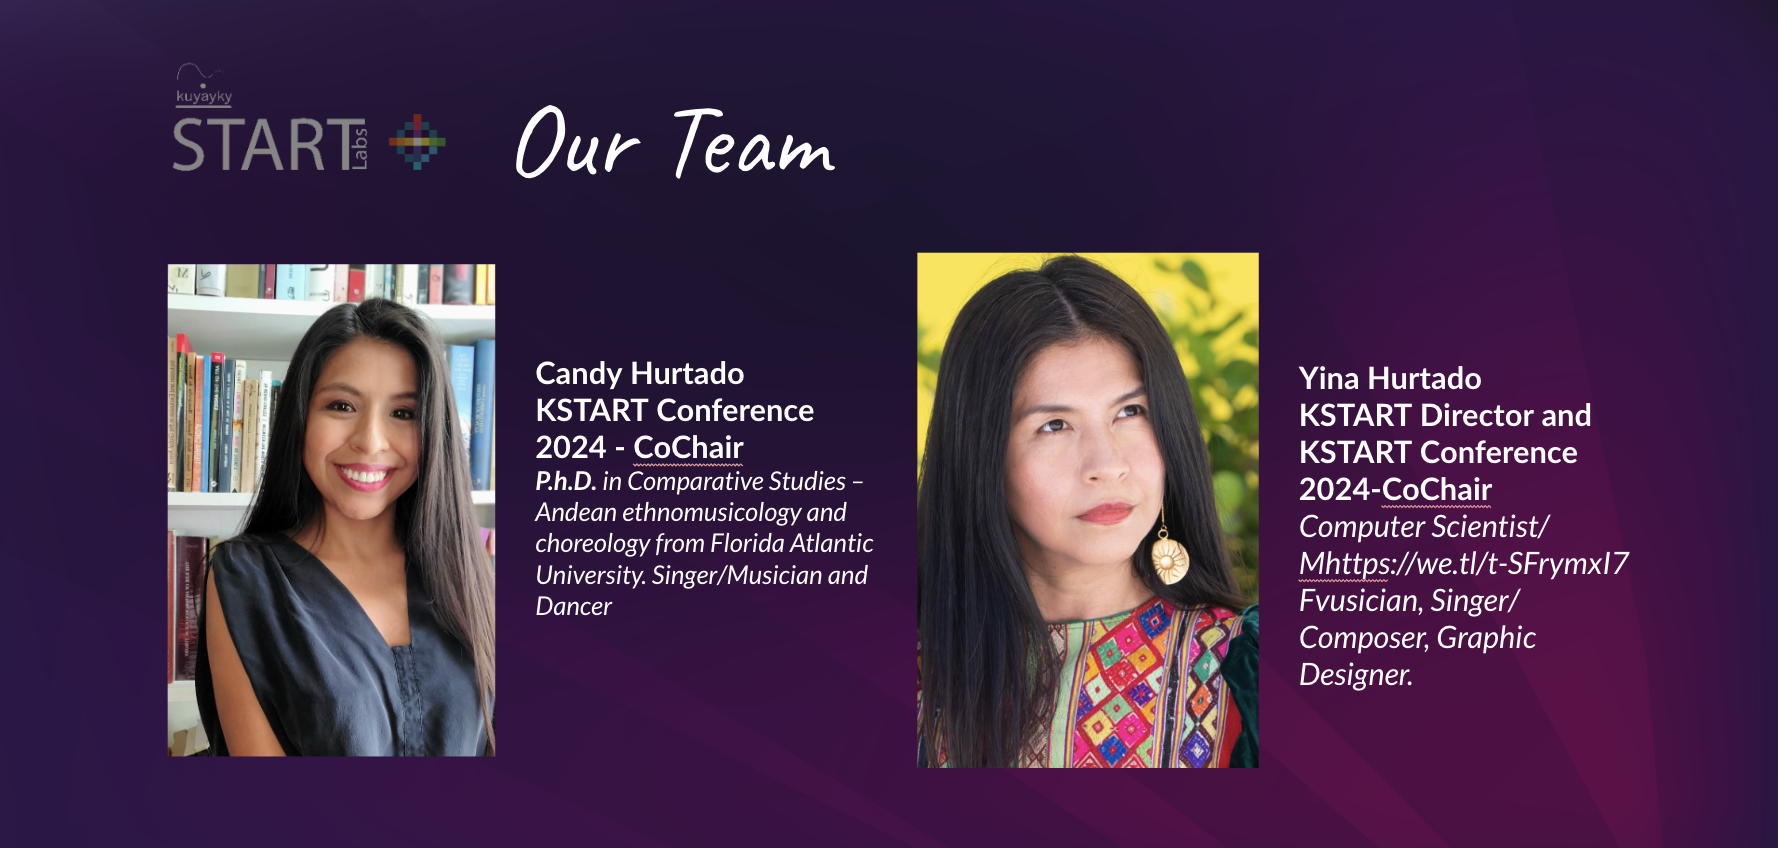 

Our Team: Candy Hurtado
KSTART Conference 2024 - CoChair
P.h.D. in Comparative Studies – Andean ethnomusicology and choreology from Florida Atlantic 
University. Singer/Musician and Dancer
Yina Hurtado
KSTART Director and KSTART Conference 2024-CoChair
Computer Scientist/ Mhttps://we.tl/t-SFrymxI7Fvusician, Singer/ Composer, Graphic Designer. 
